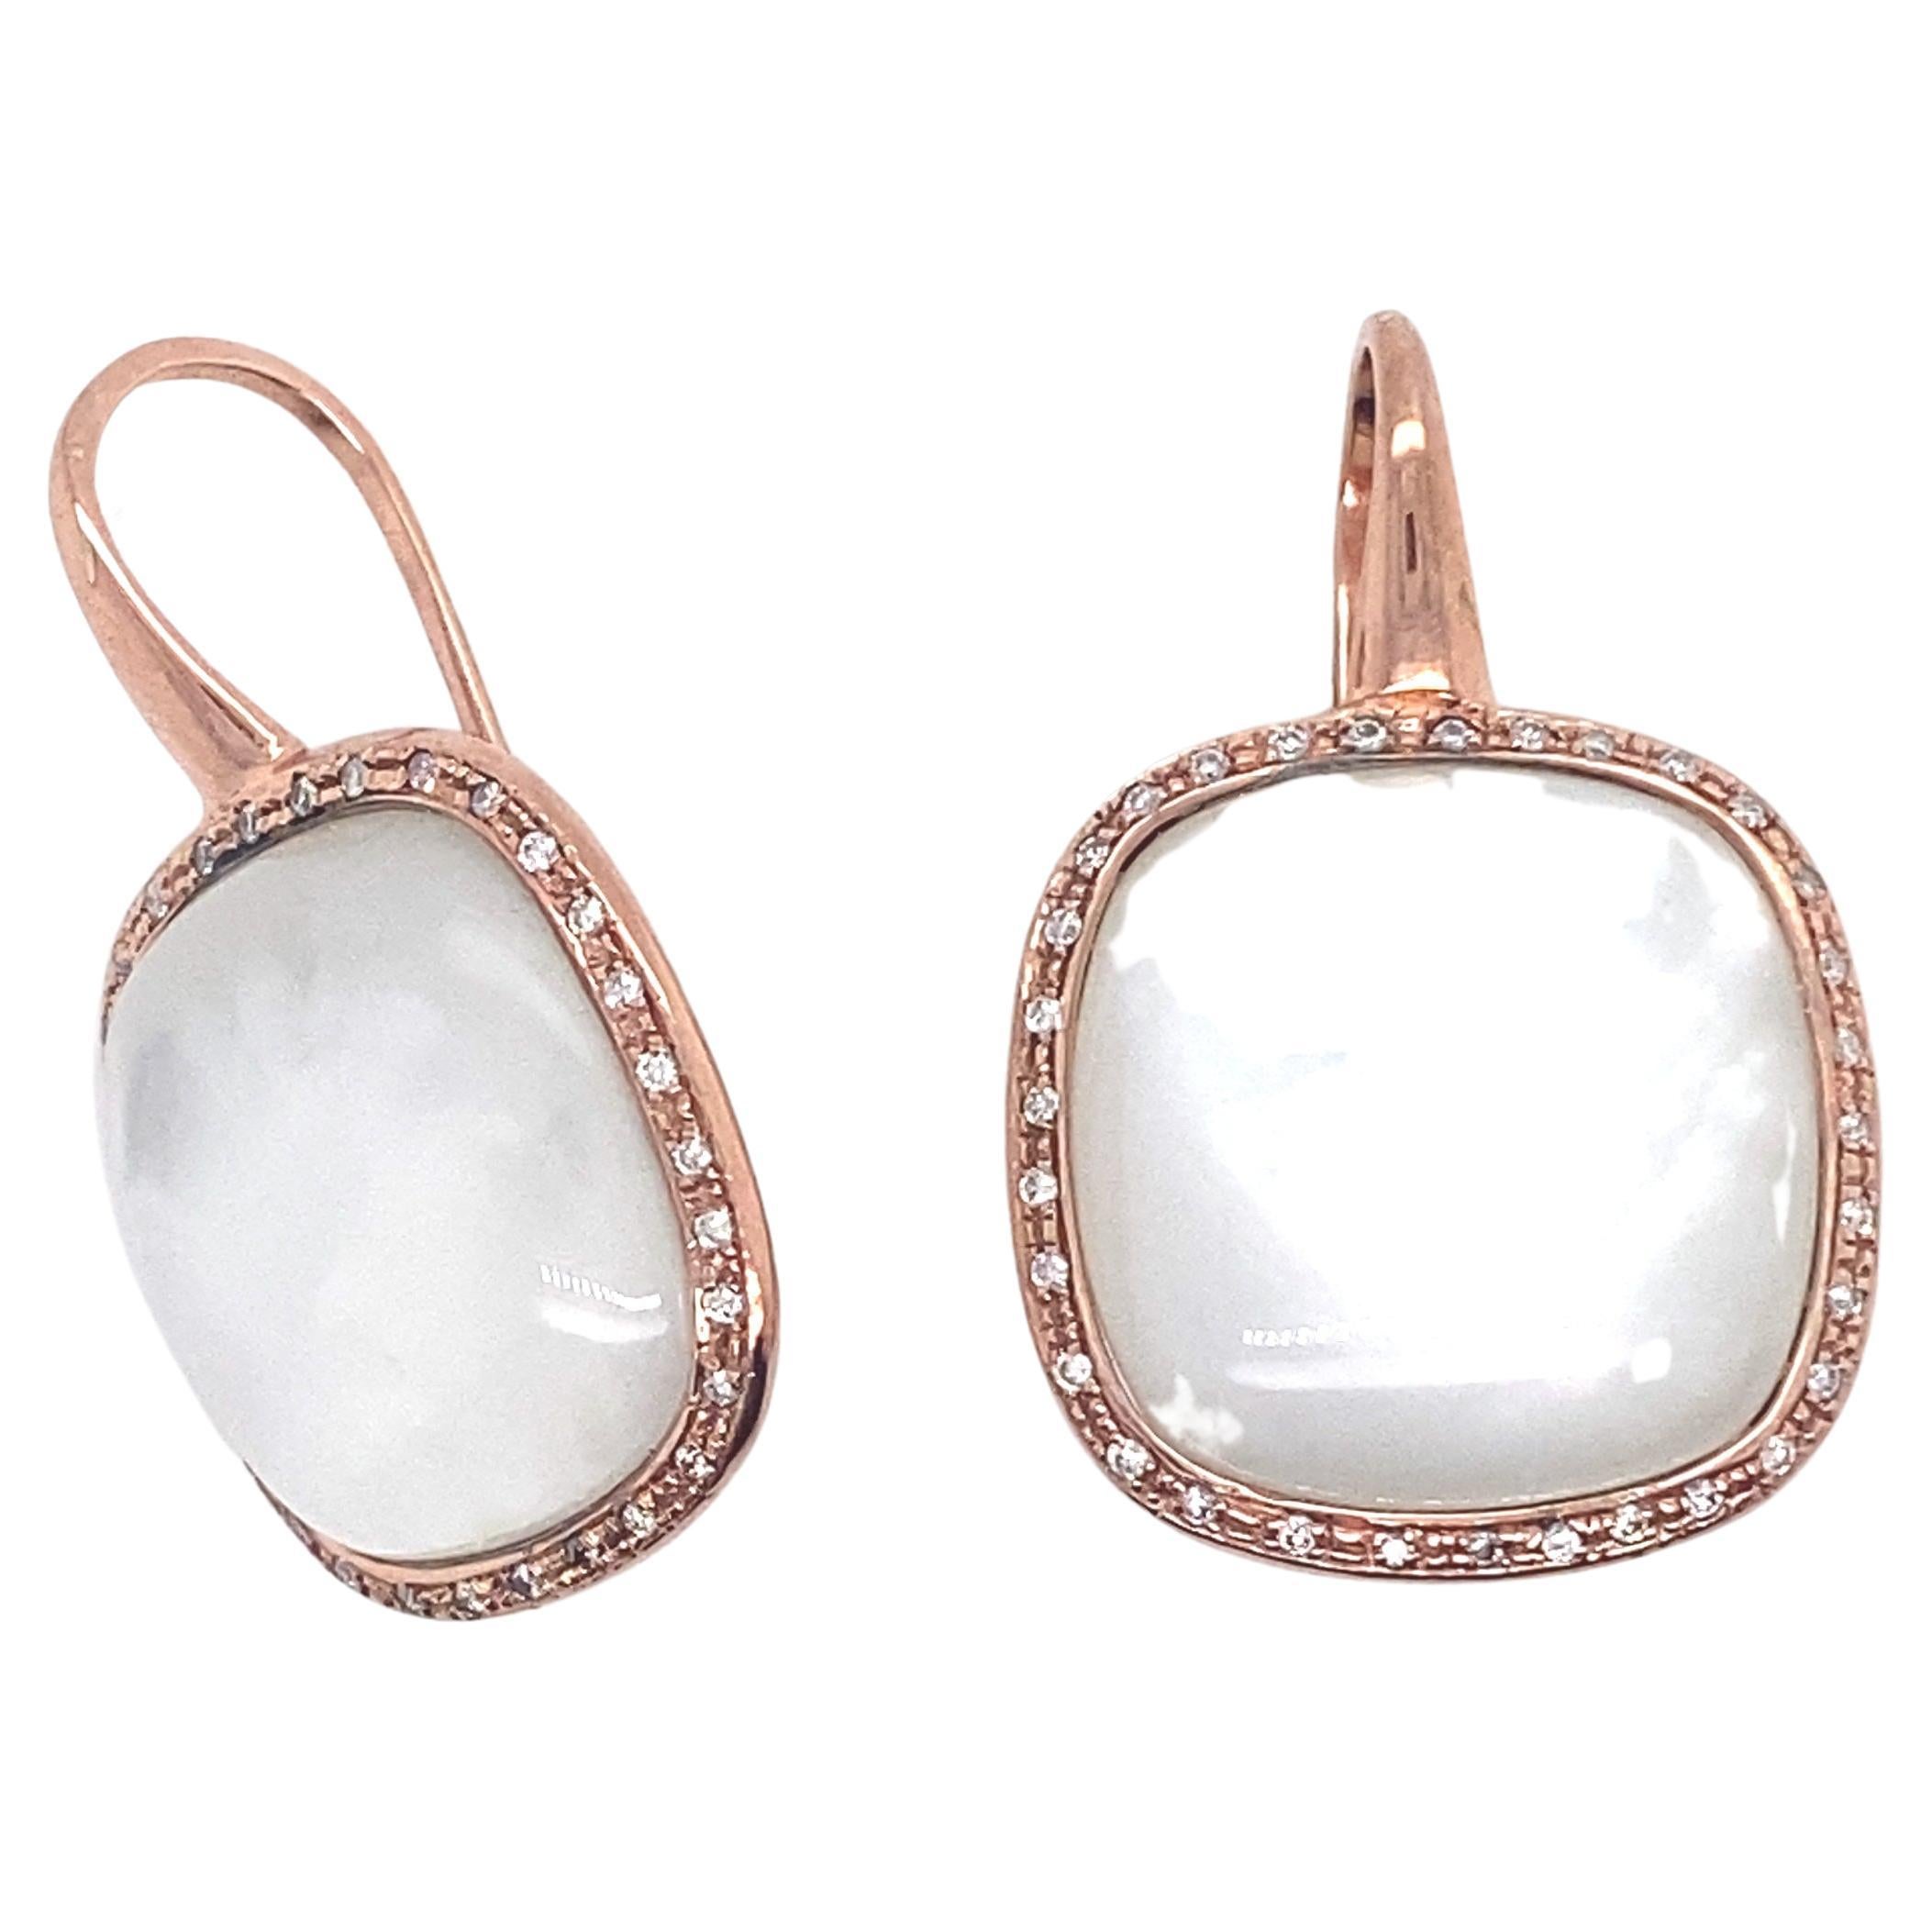 Welcome to our showcase page, where we're delighted to present this stunning pair of 18-carat rose gold earrings, adorned with a magnificent white quartz surrounded by diamonds, an elegant combination of softness and sparkle.

These 18-carat rose